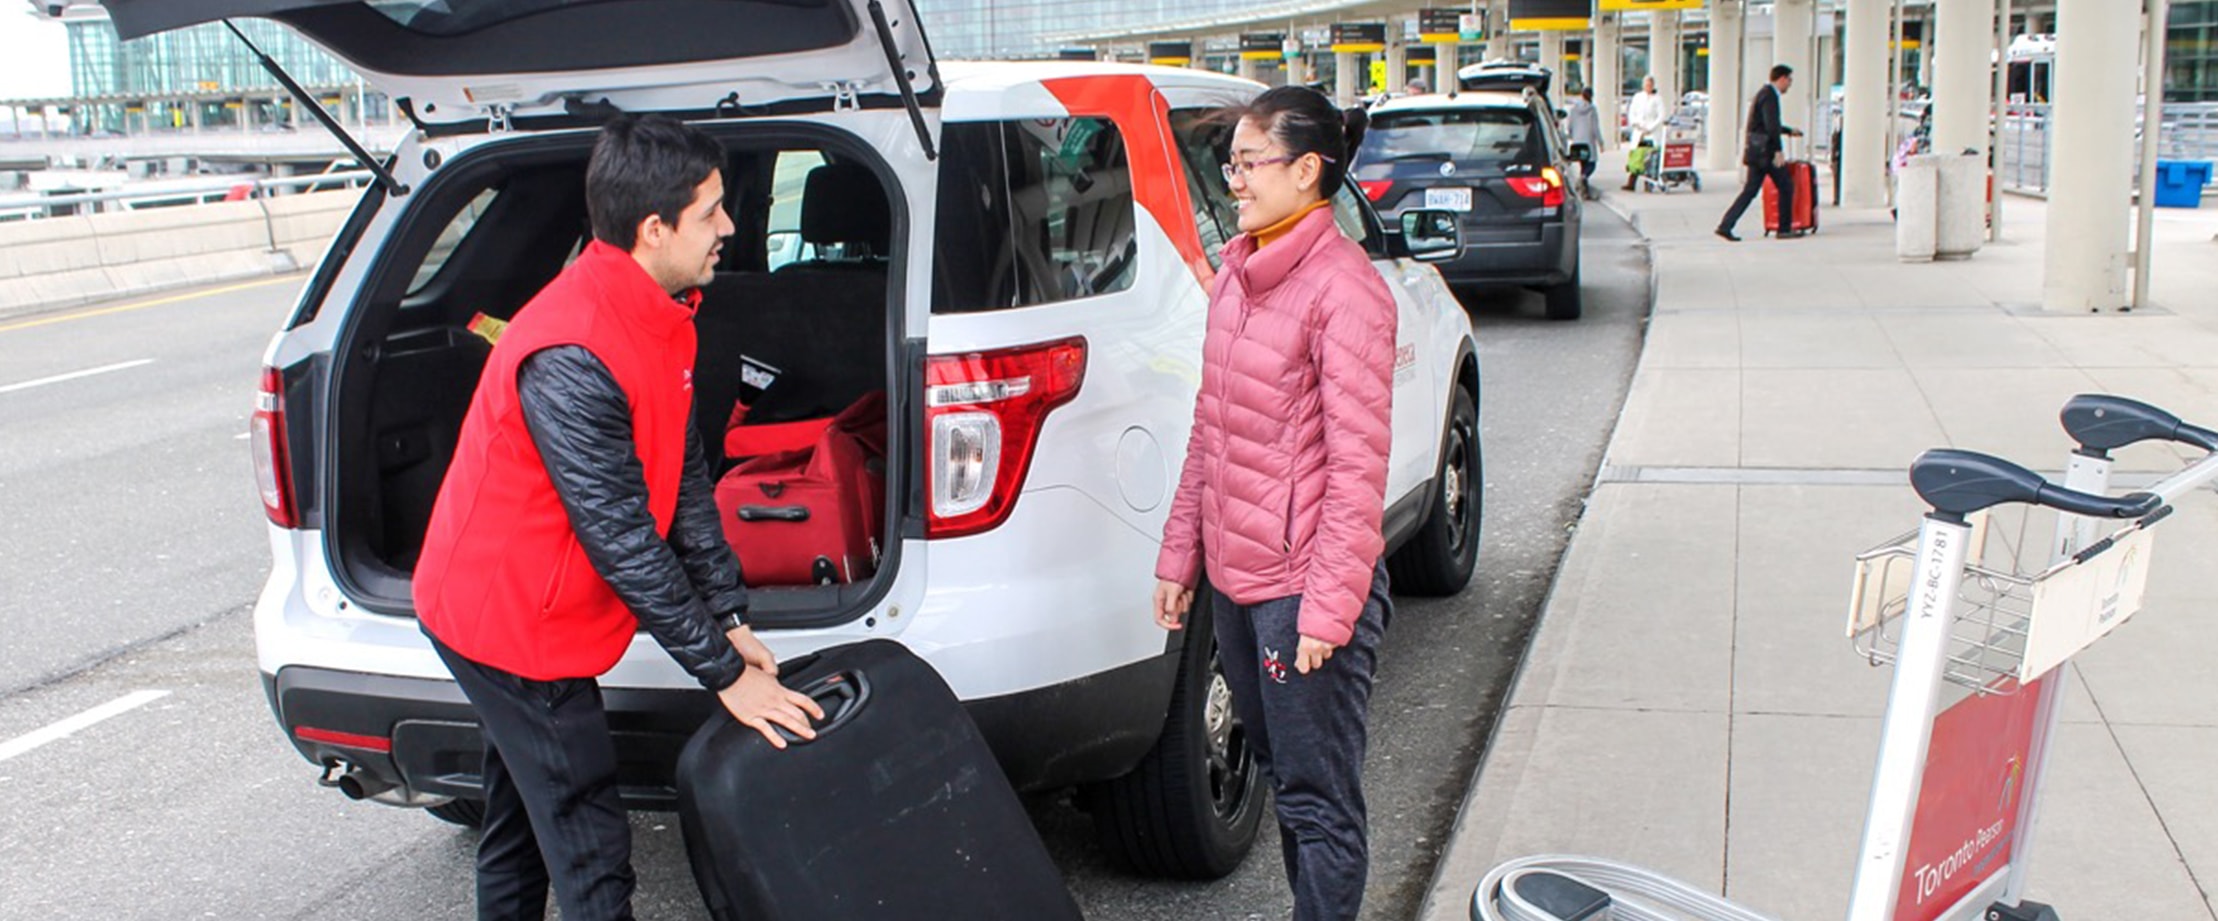 Two happy travellers loading their baggage into their car at Toronto Pearson